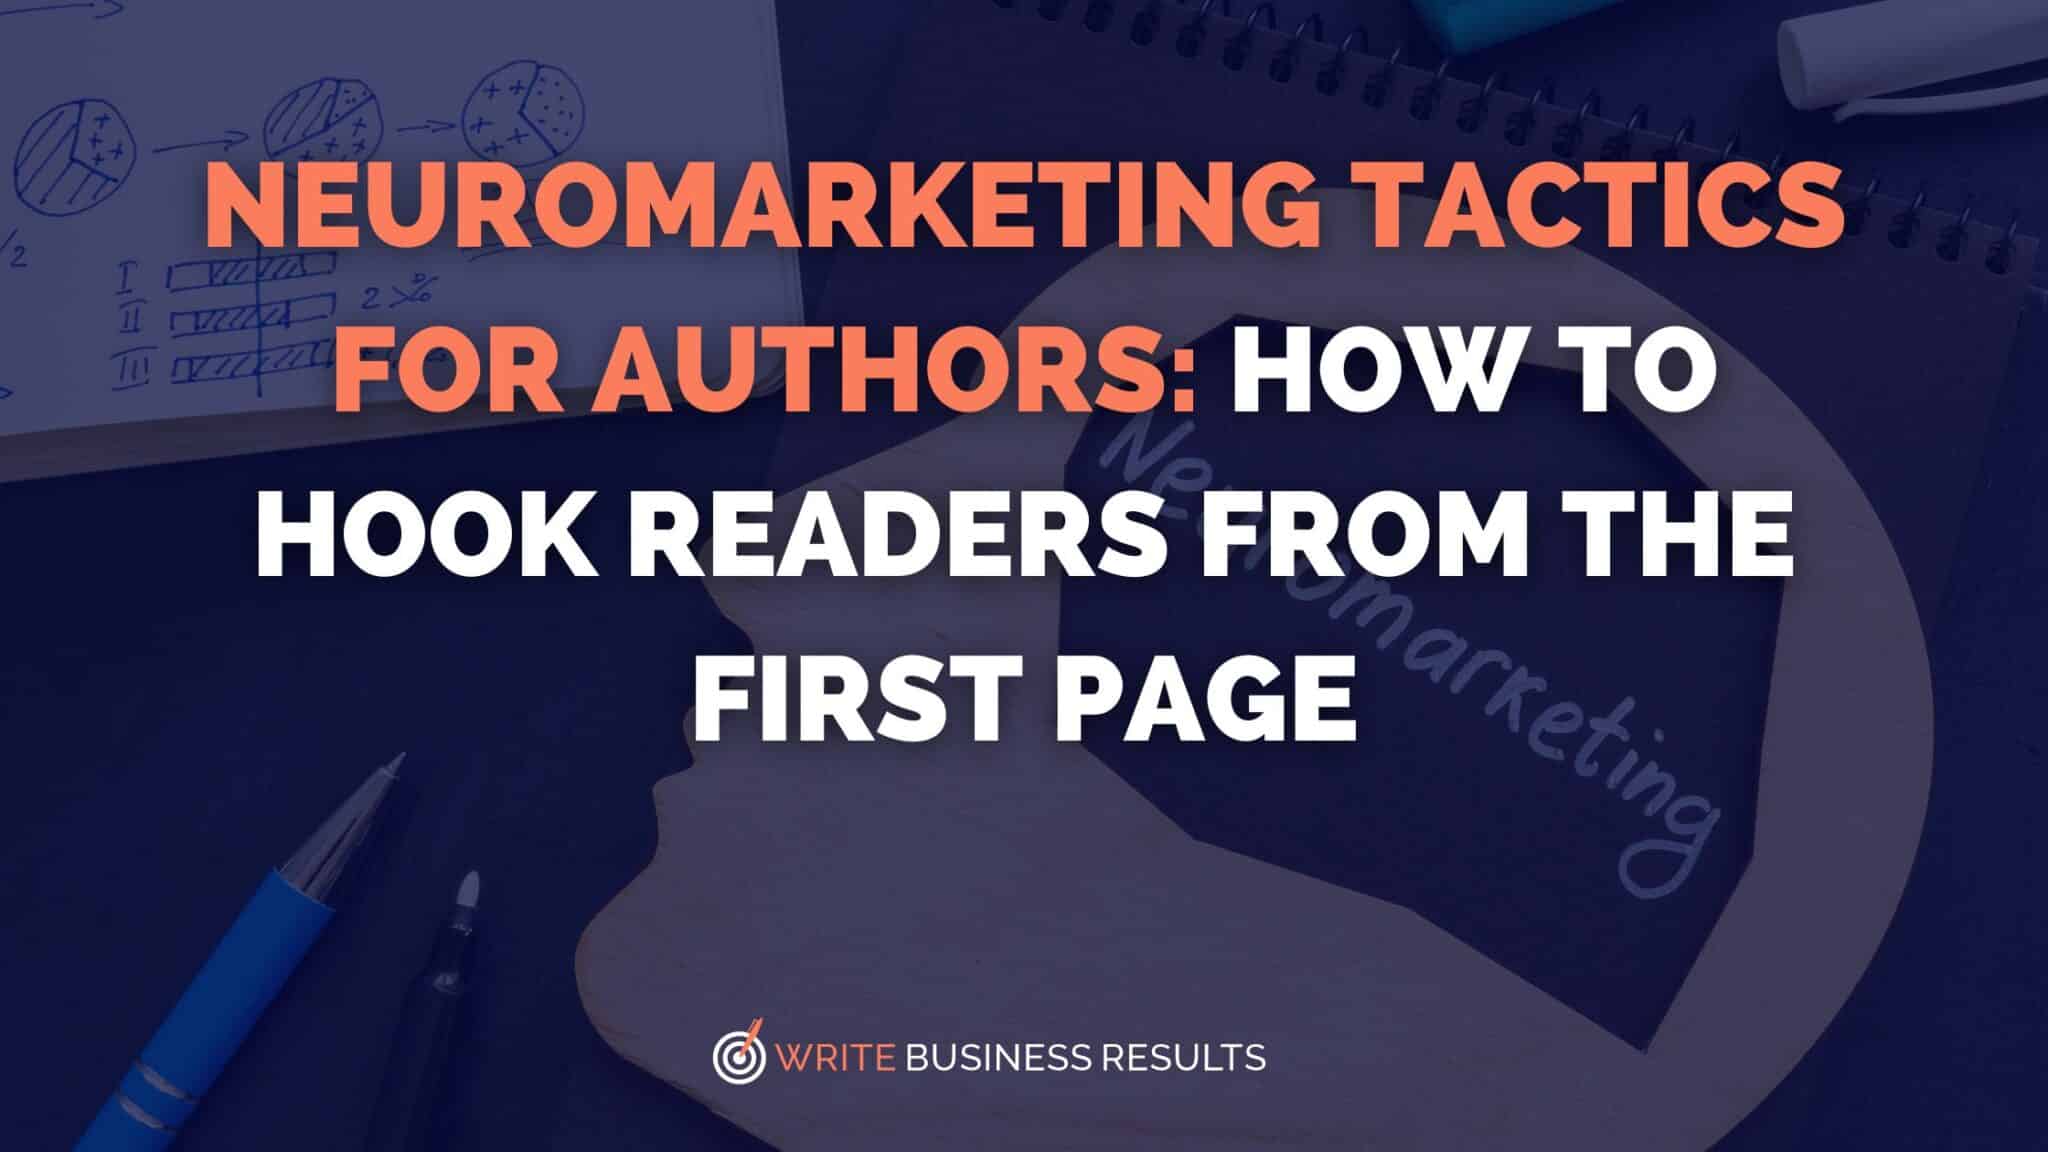 Neuromarketing Tactics for Authors: How to Hook Readers from the First Page